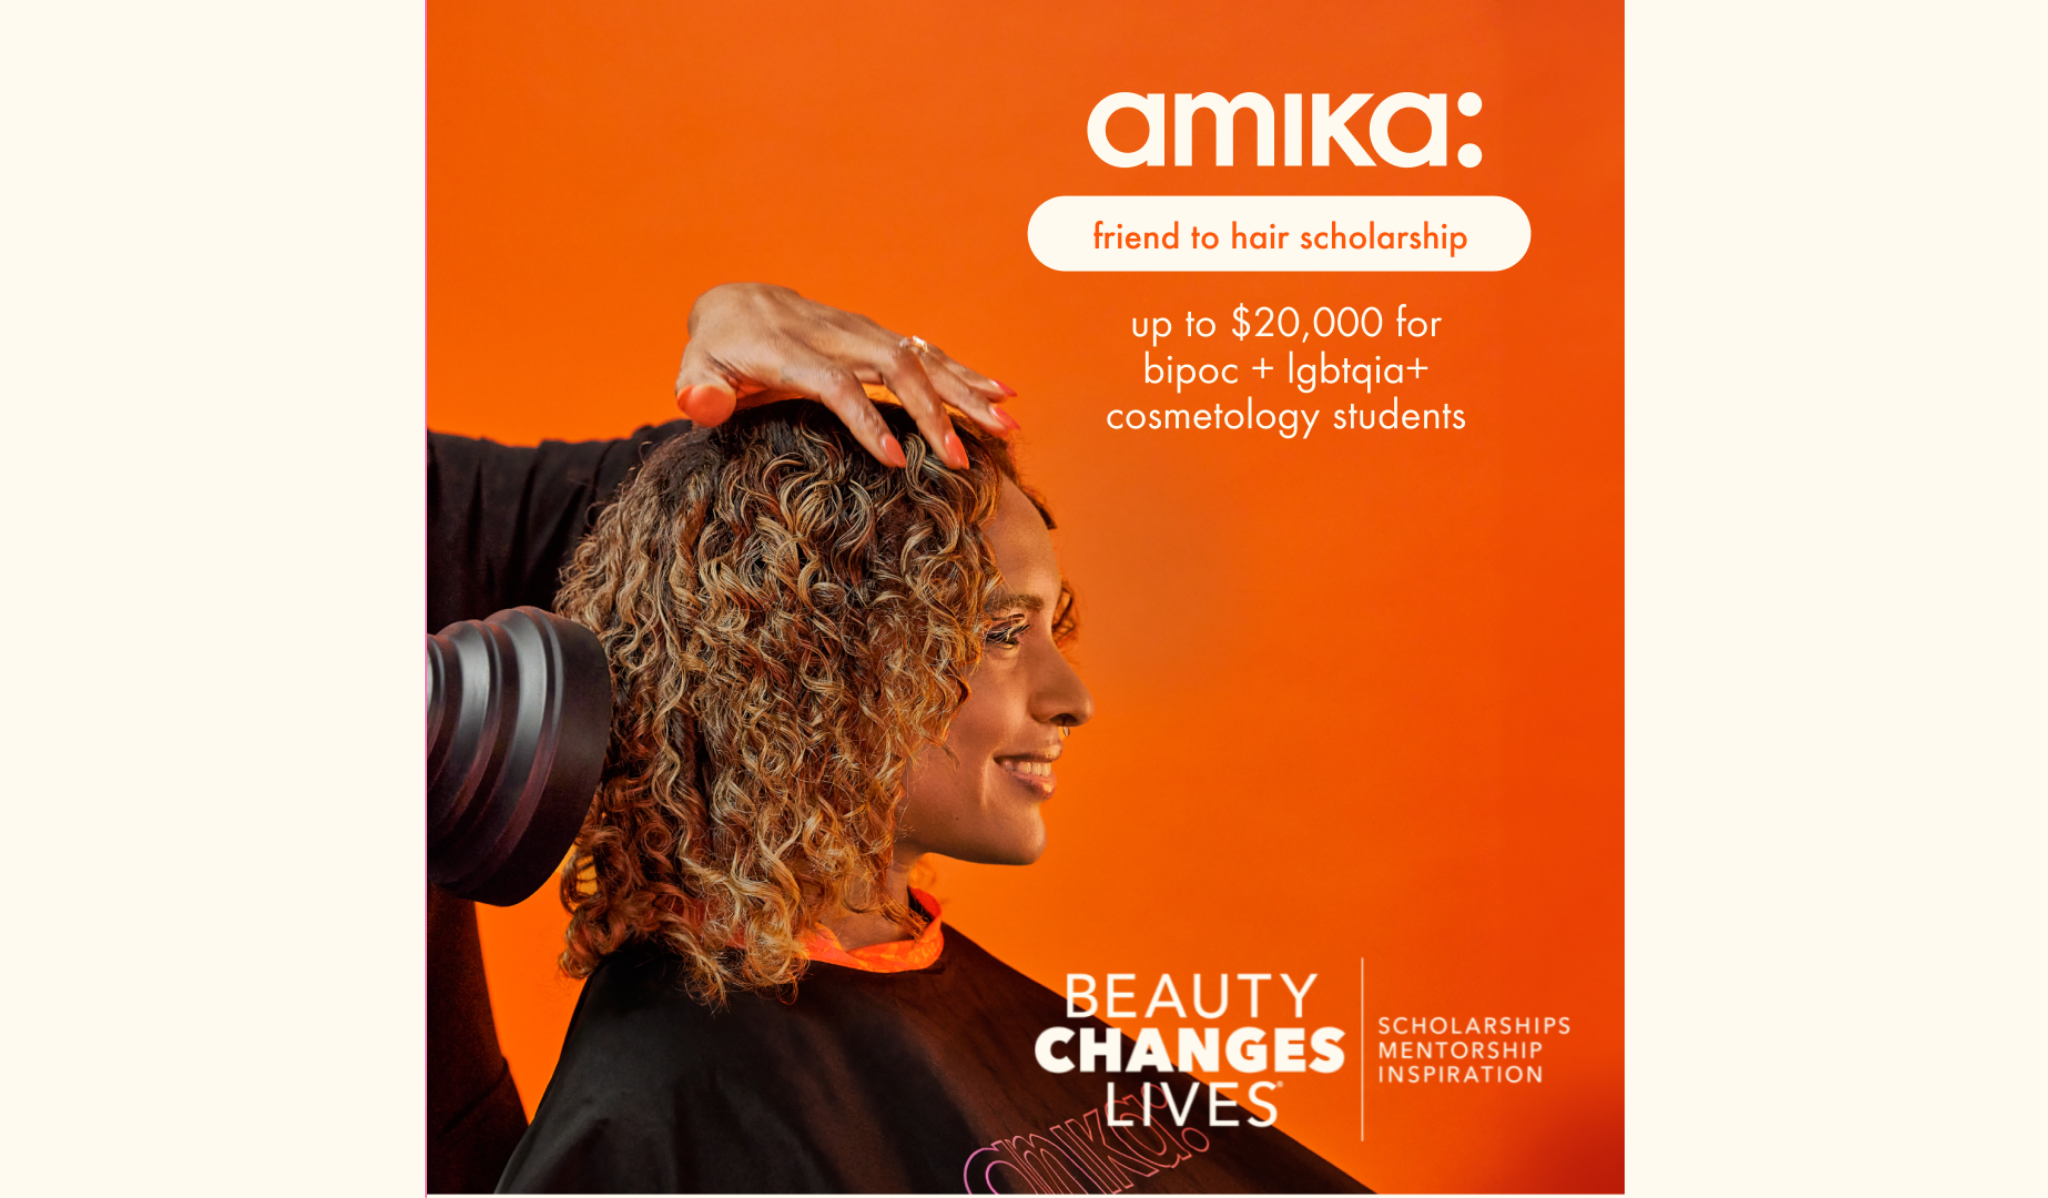 amika x beauty changes lives friend to hair scholarship